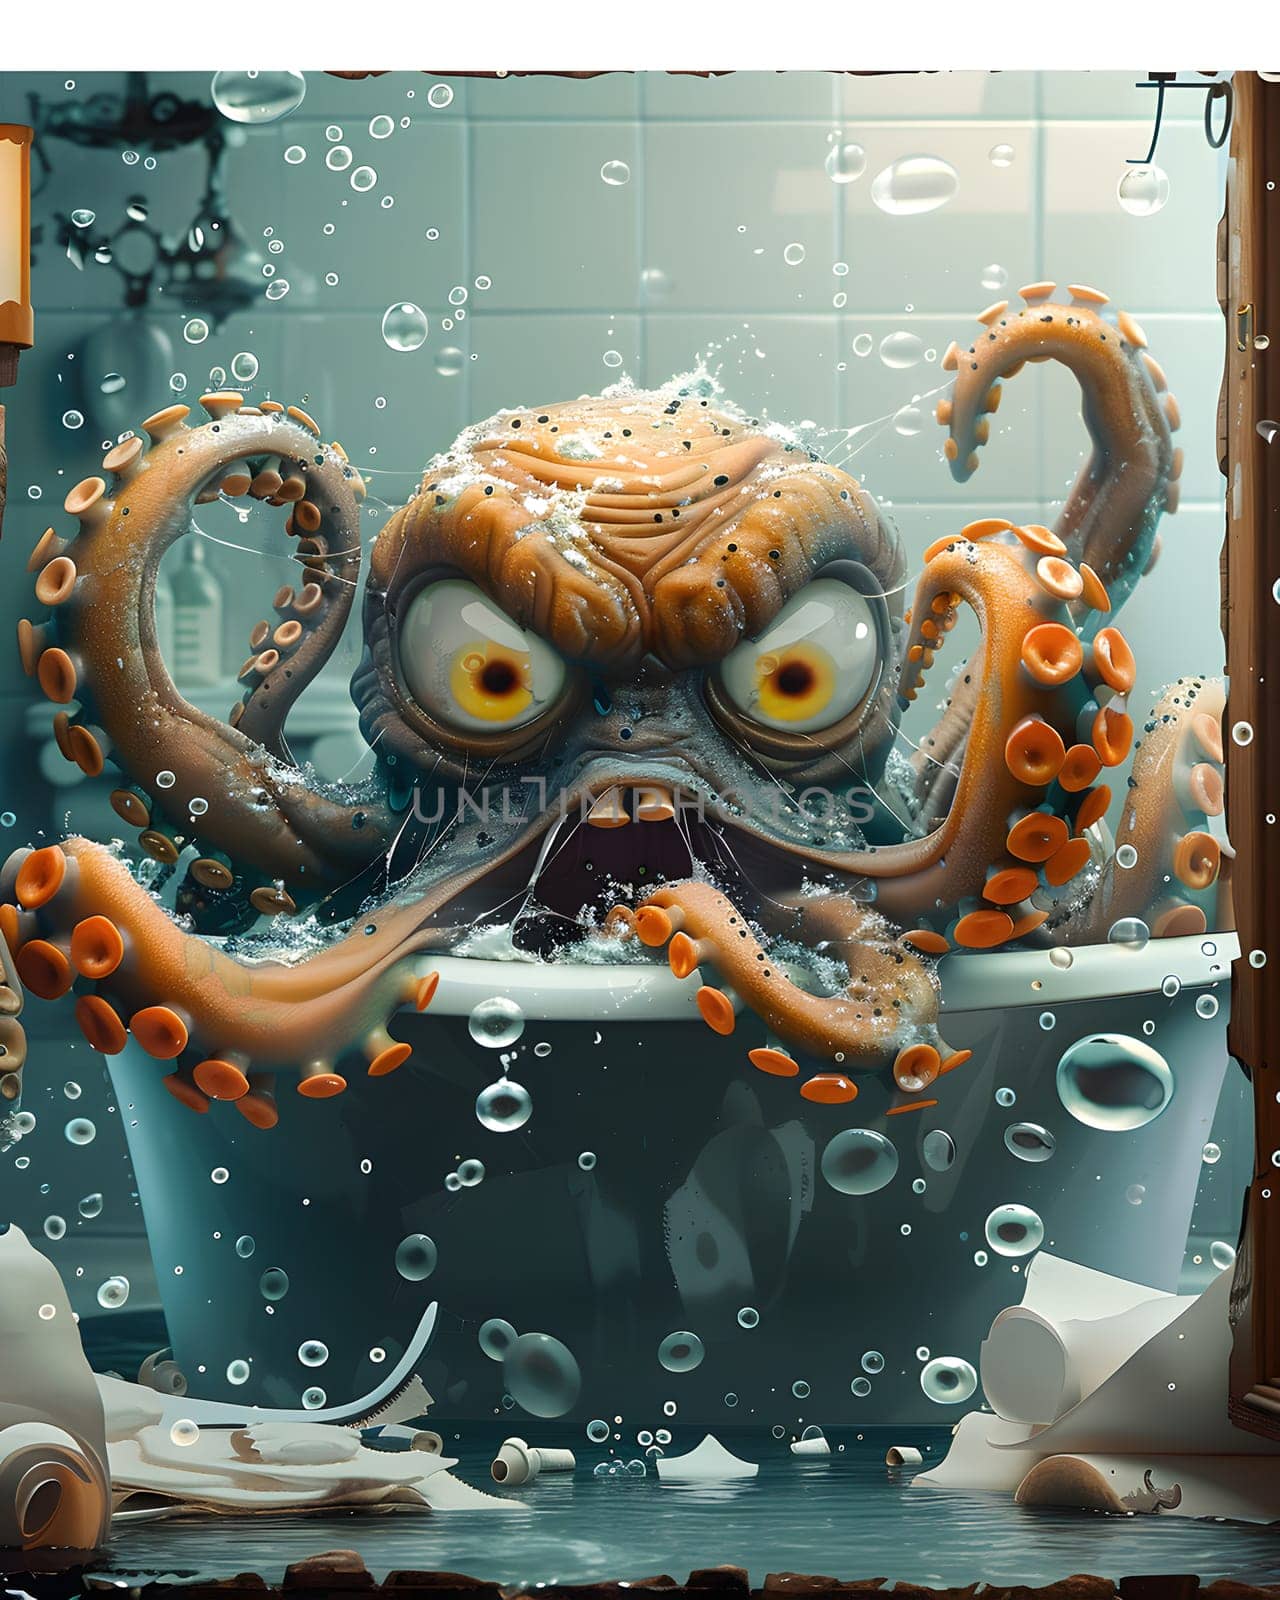 Fictional octopus sculpture bathing in a glass tub, an artistic organism by Nadtochiy